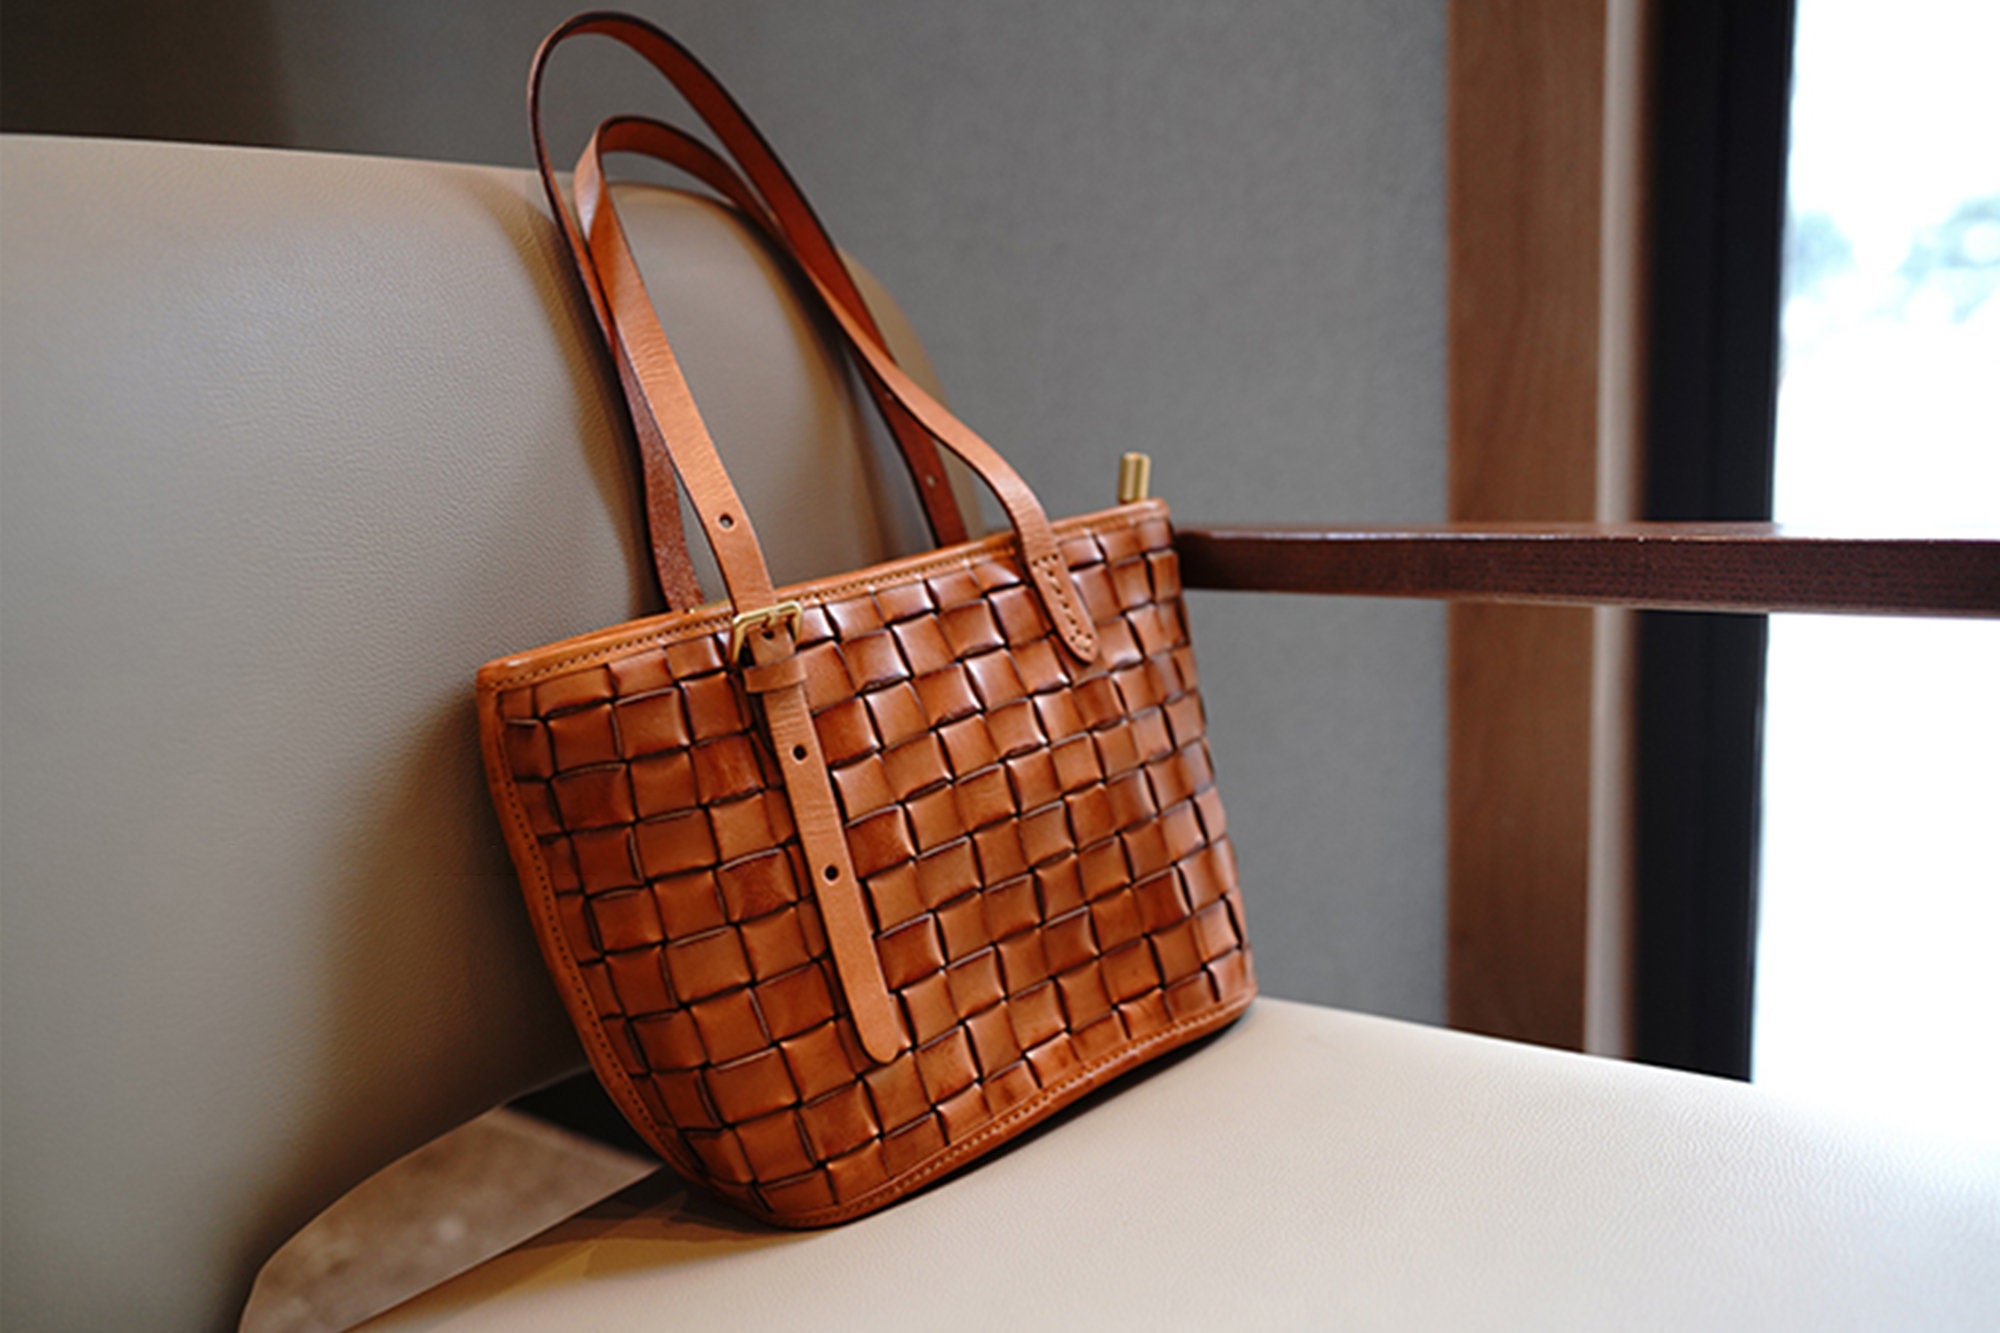 Woven Leather Bags: How to Craft and Weave Purses, Pouches, Wallets and More [Book]